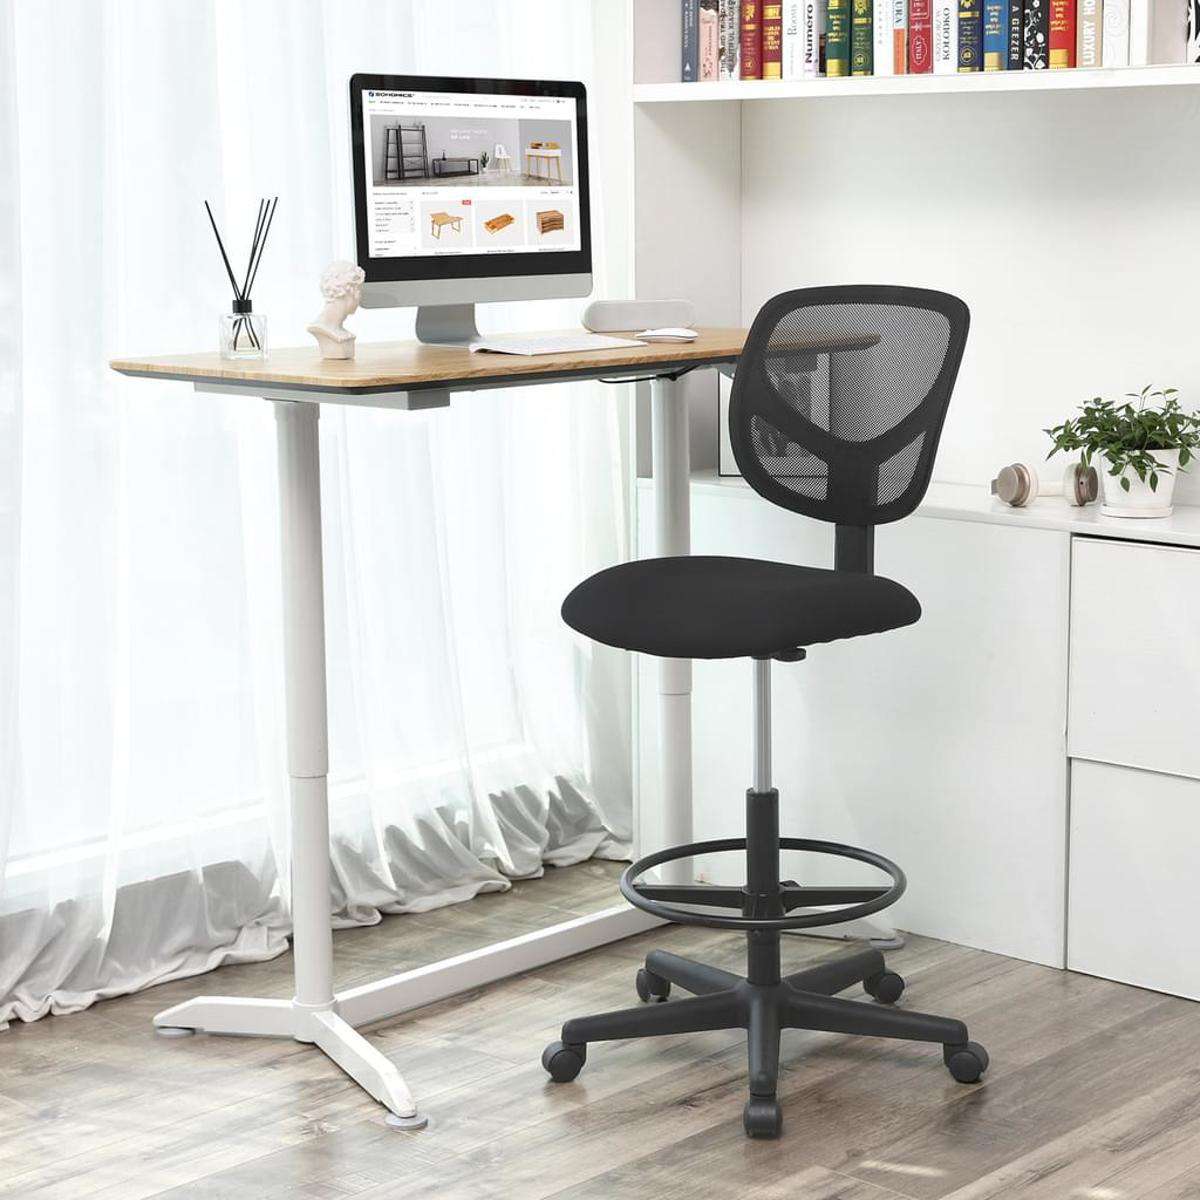 Nancy's Port Morris Office Chair With Adjustable Foot Ring - Adjustable Work Stool 60 x 60 x 117.5 cm